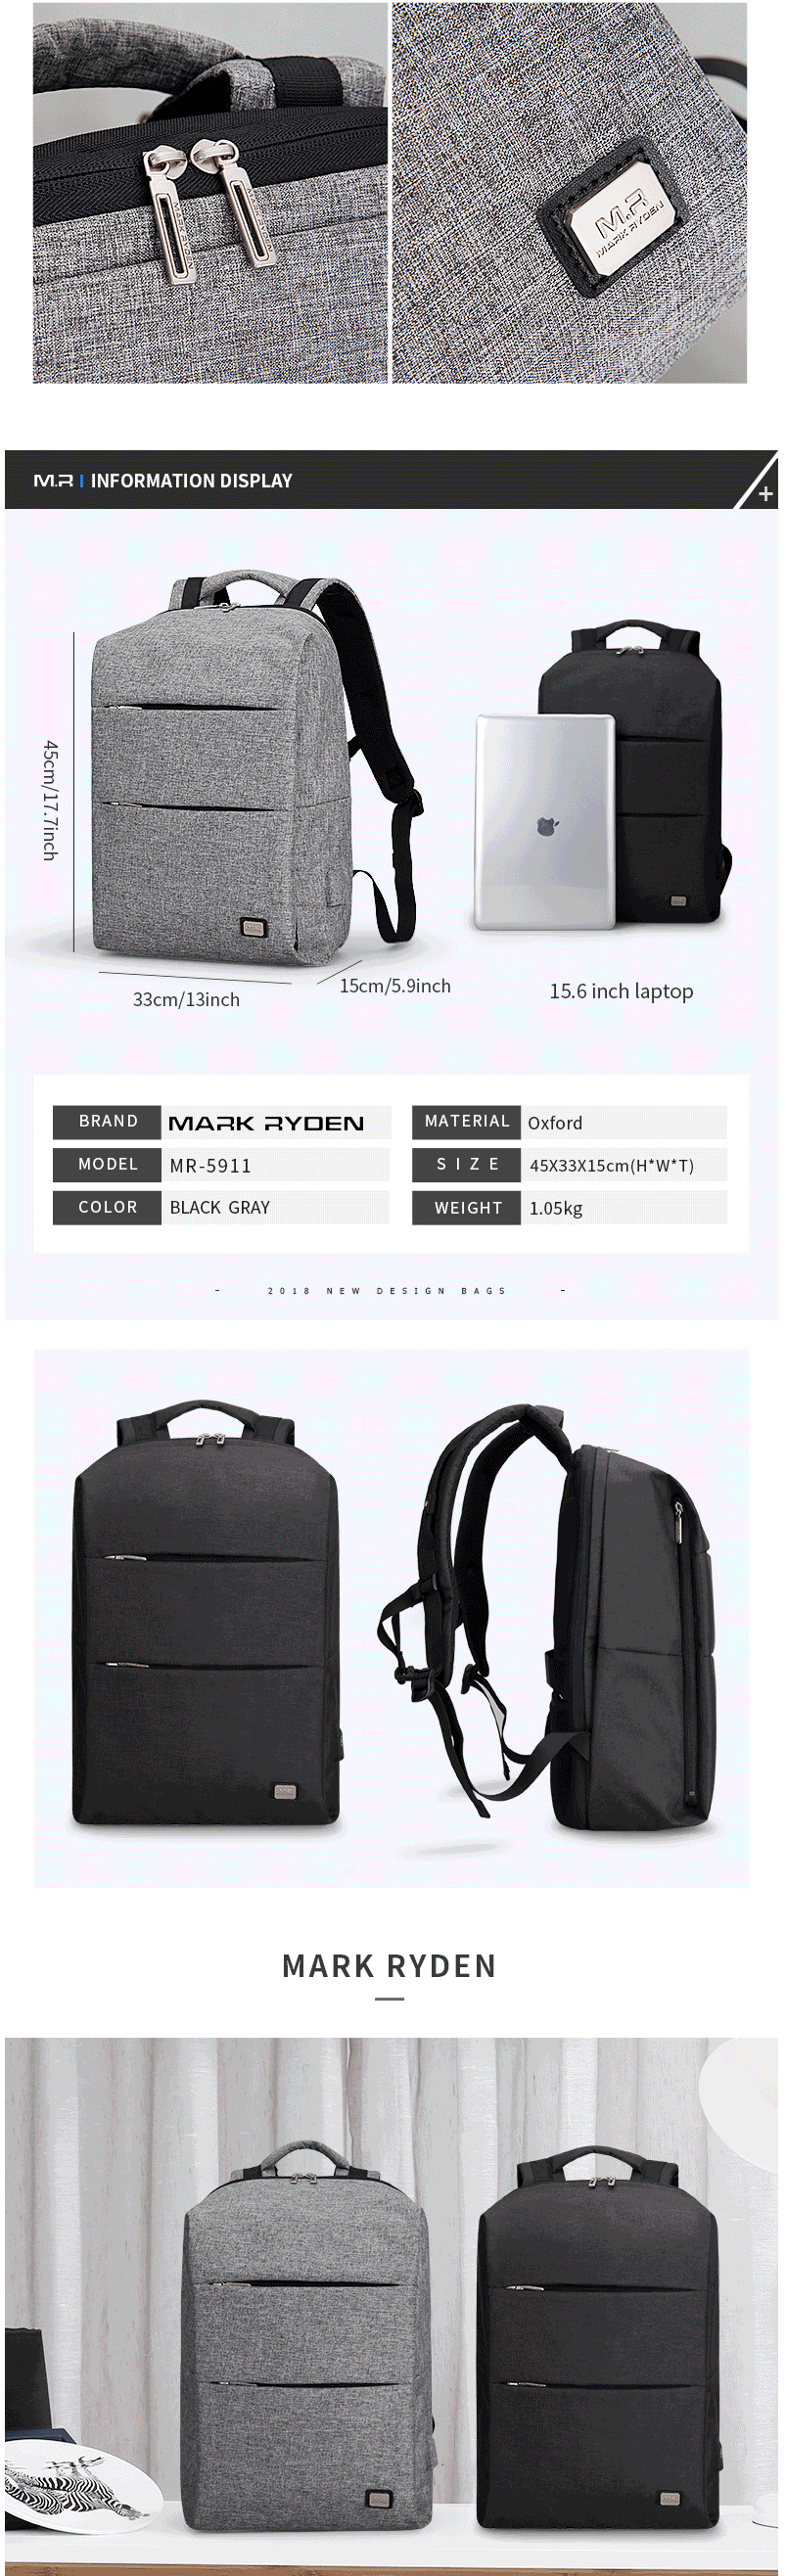 MARK-RYDEN-MR5911-156-Inches-Laptop-Backpack-USB-Charging-Waterproof-Traveling-Business-Bag-1529312